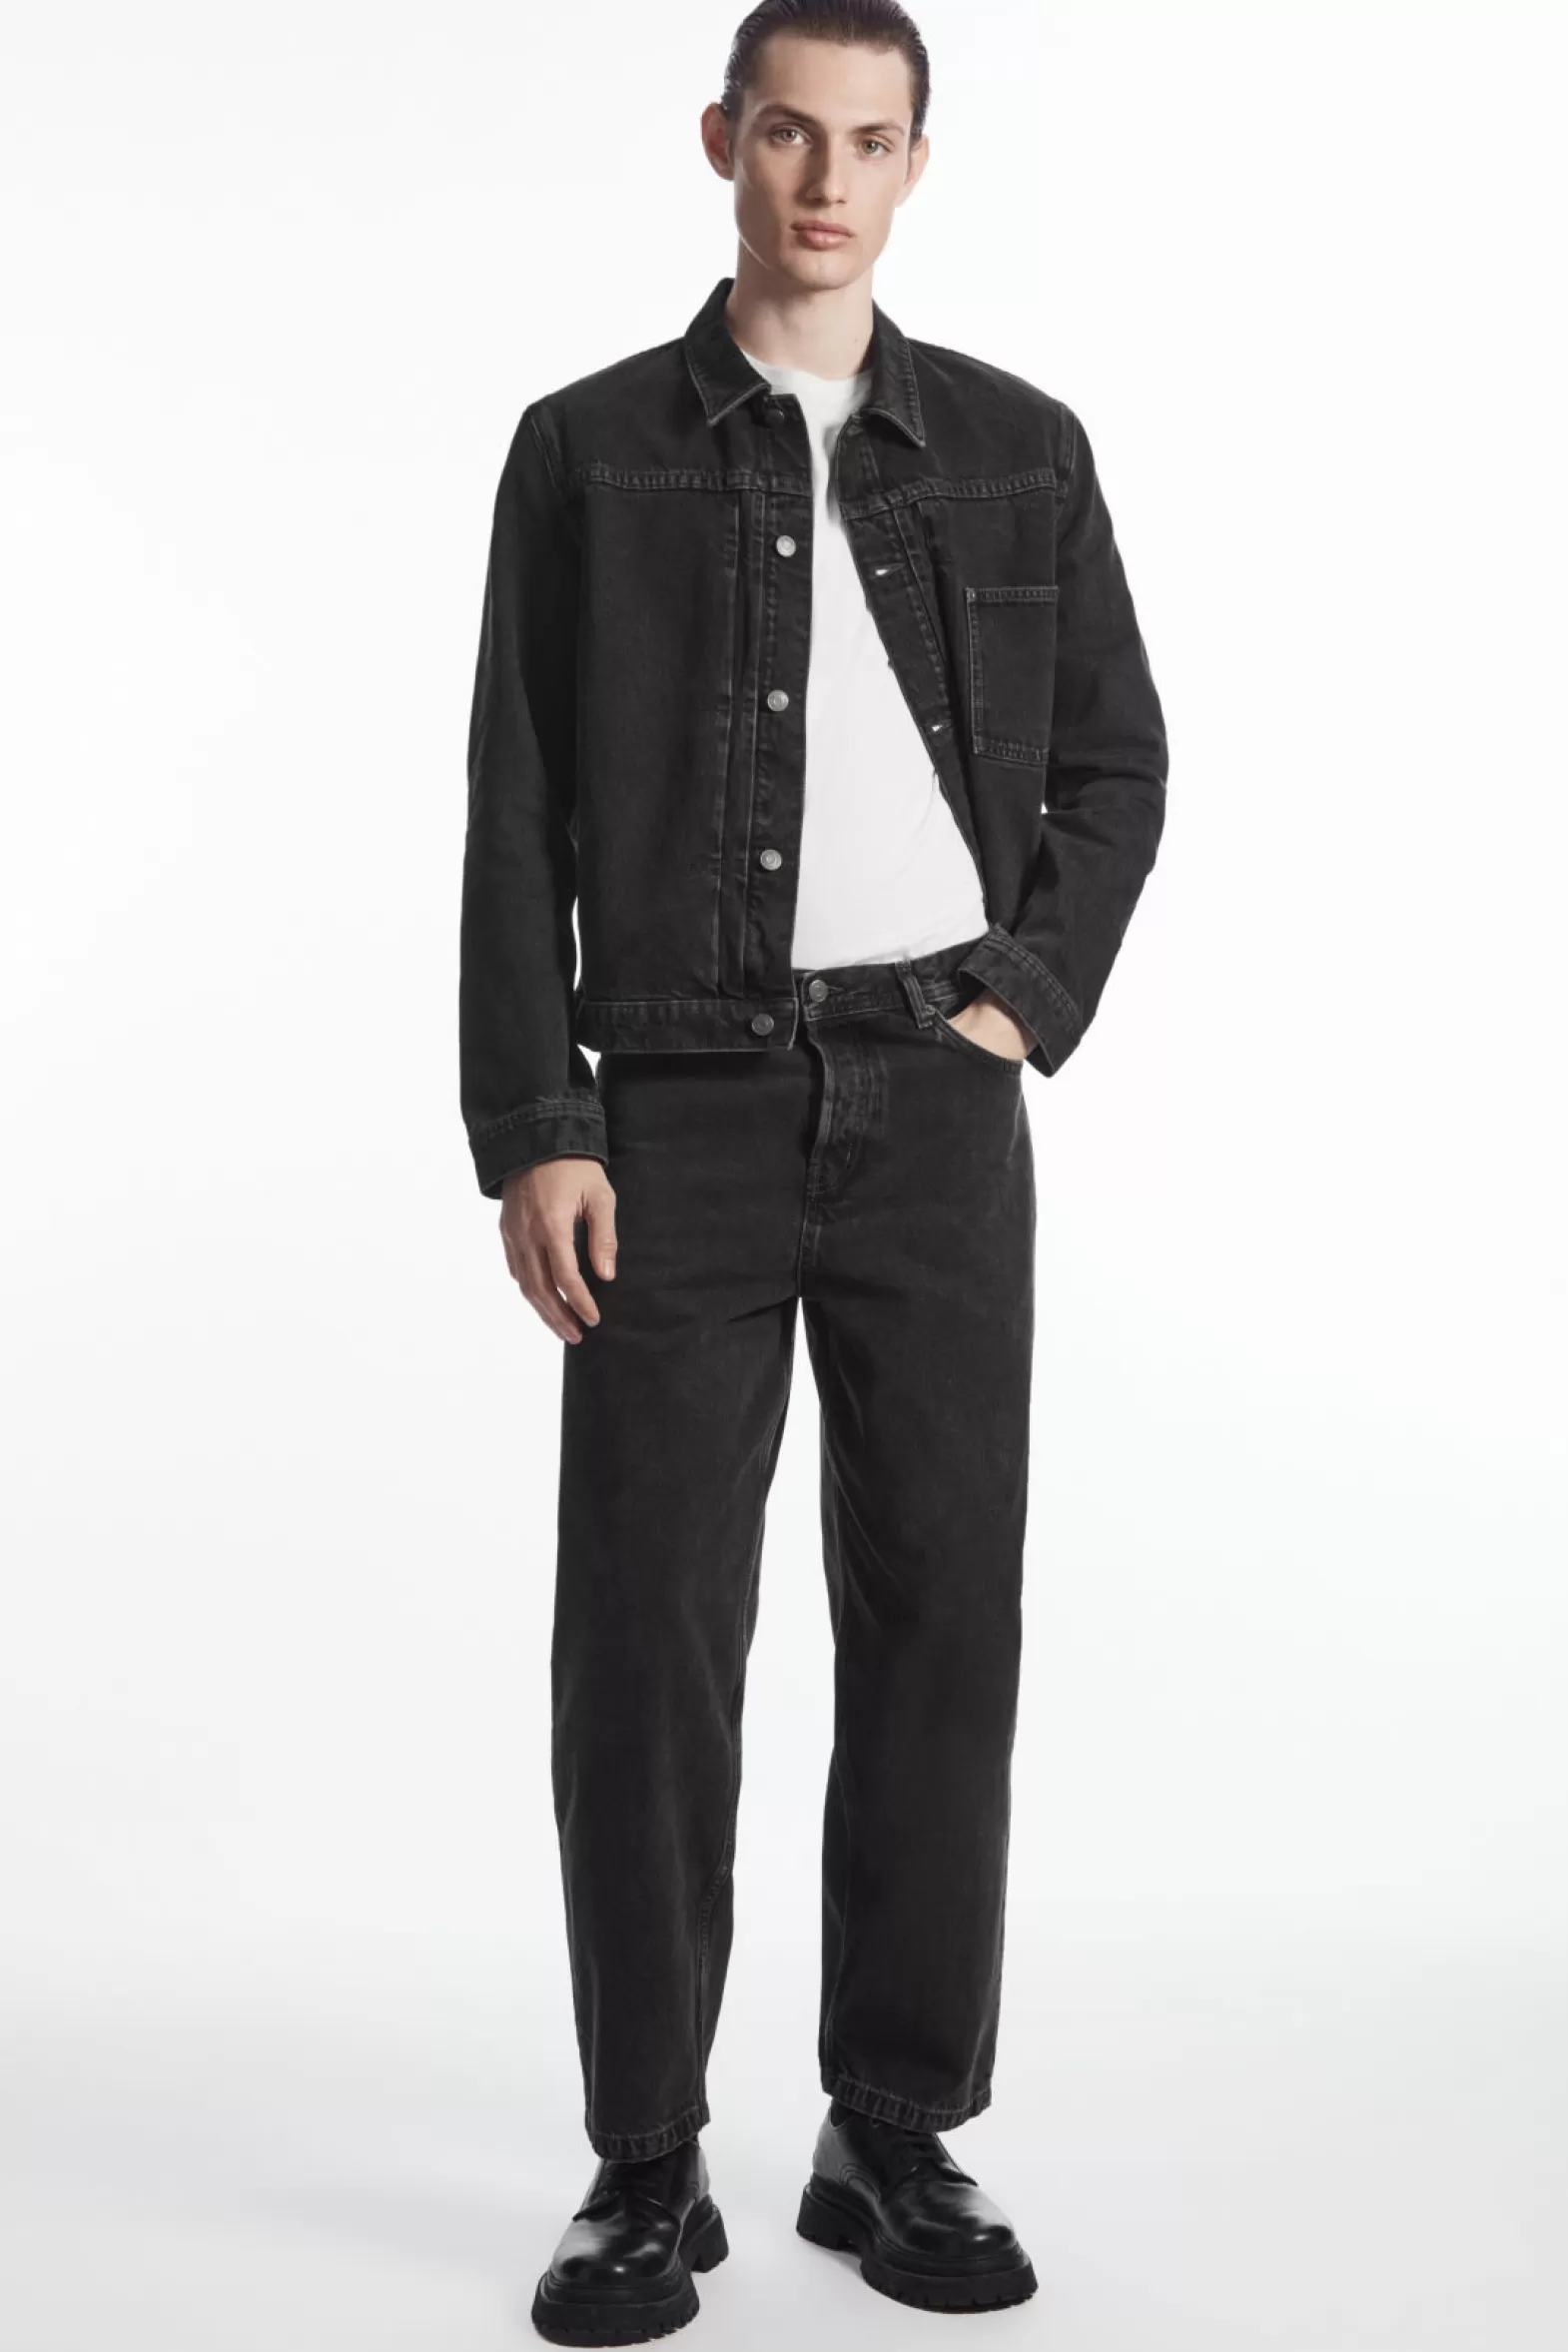 COS DOME JEANS - STRAIGHT/ANKLE LENGTH